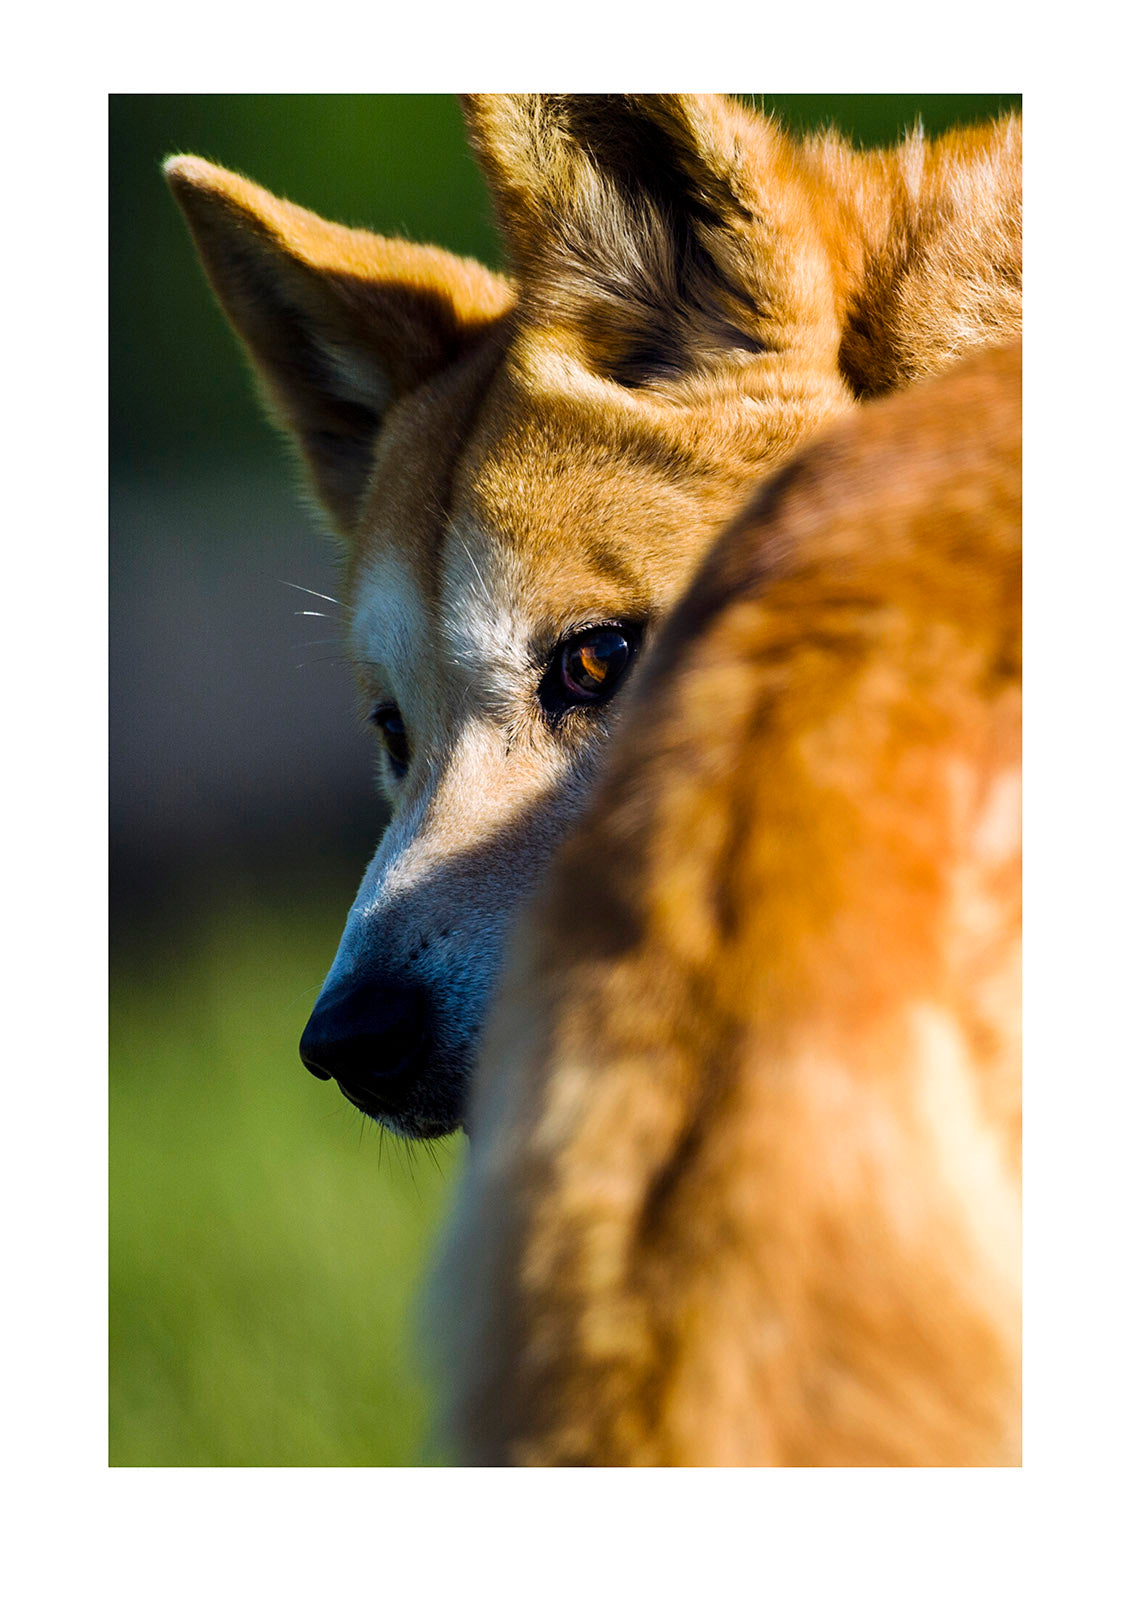 A wary dingo cautiously looking over it's shoulder. These intelligent and resourceful carnivores have been persecuted throughout much of Australia. Victoria, Australia.